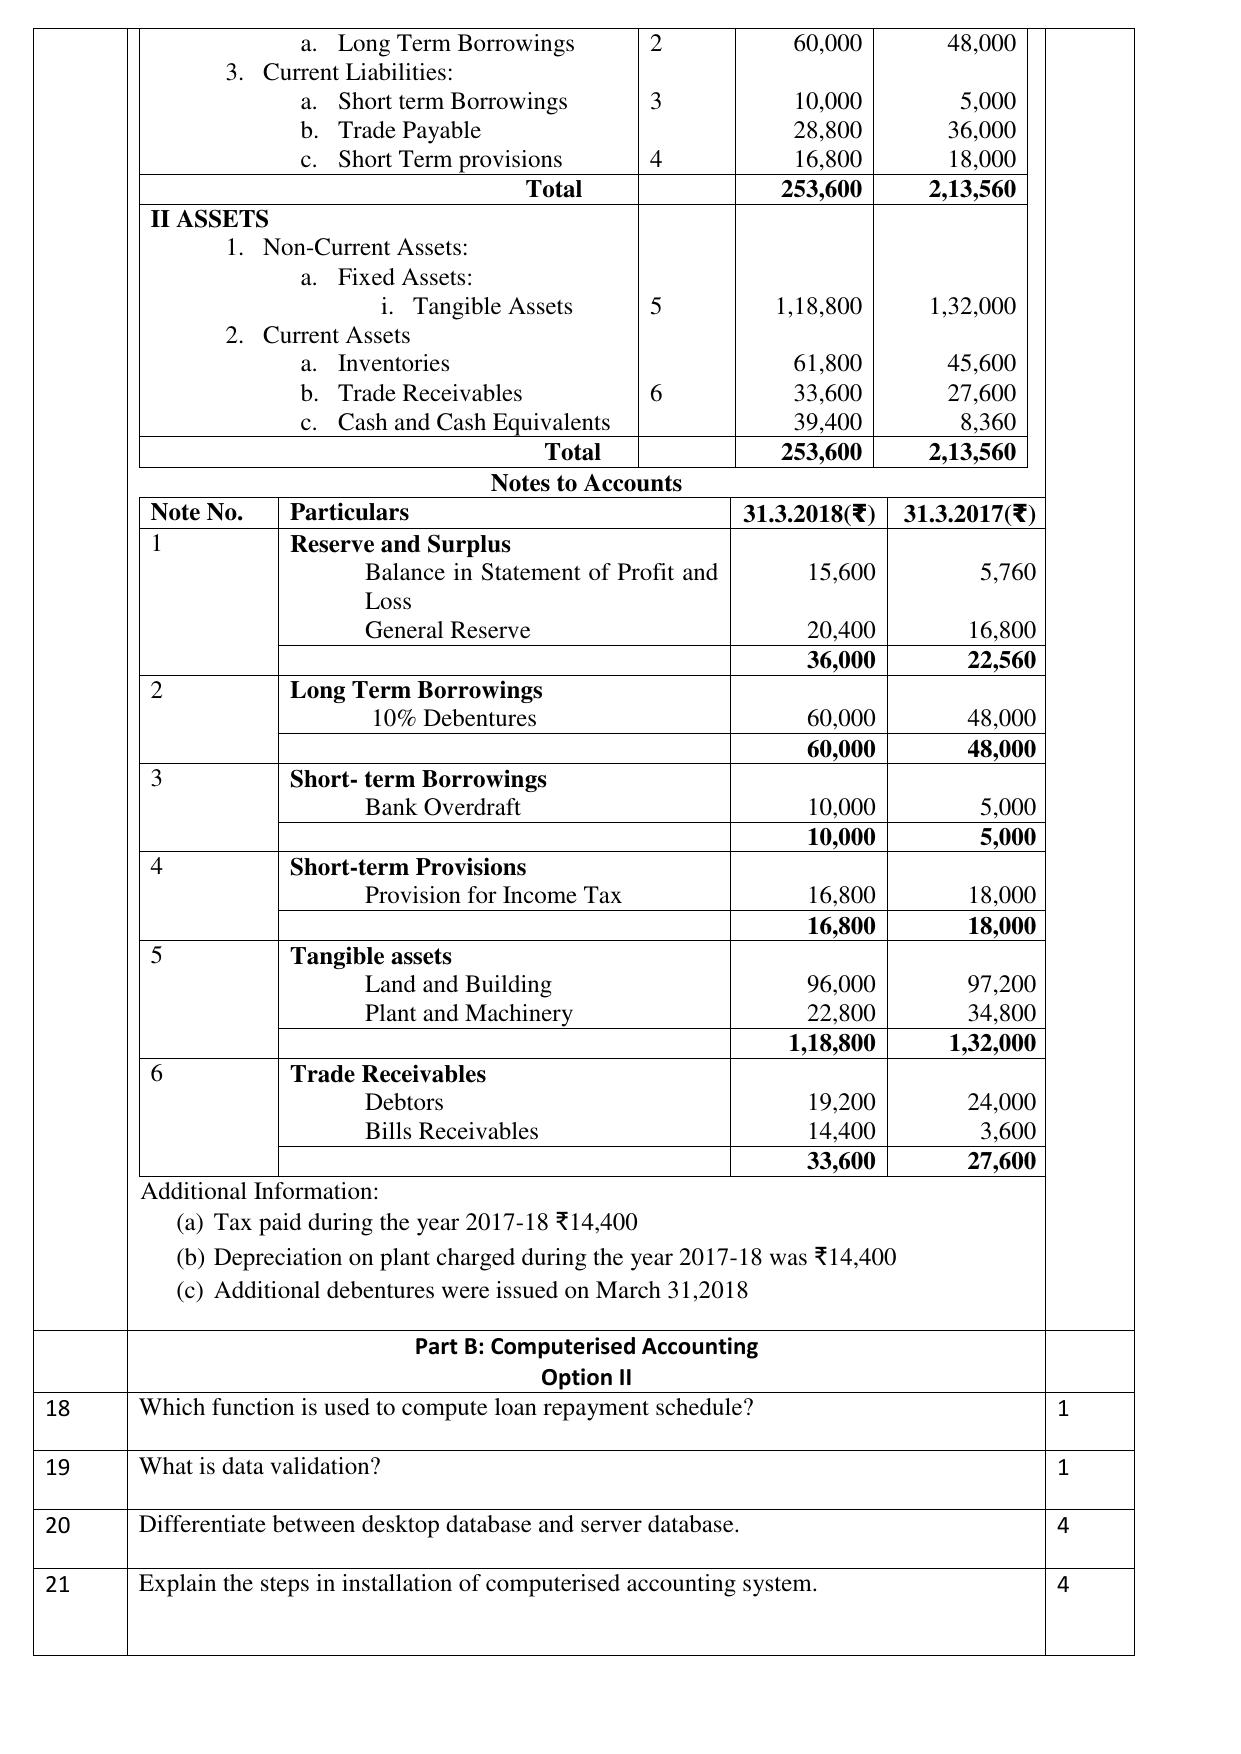 CBSE Class 12 Accountancy-Sample Paper 2018-19 - Page 9